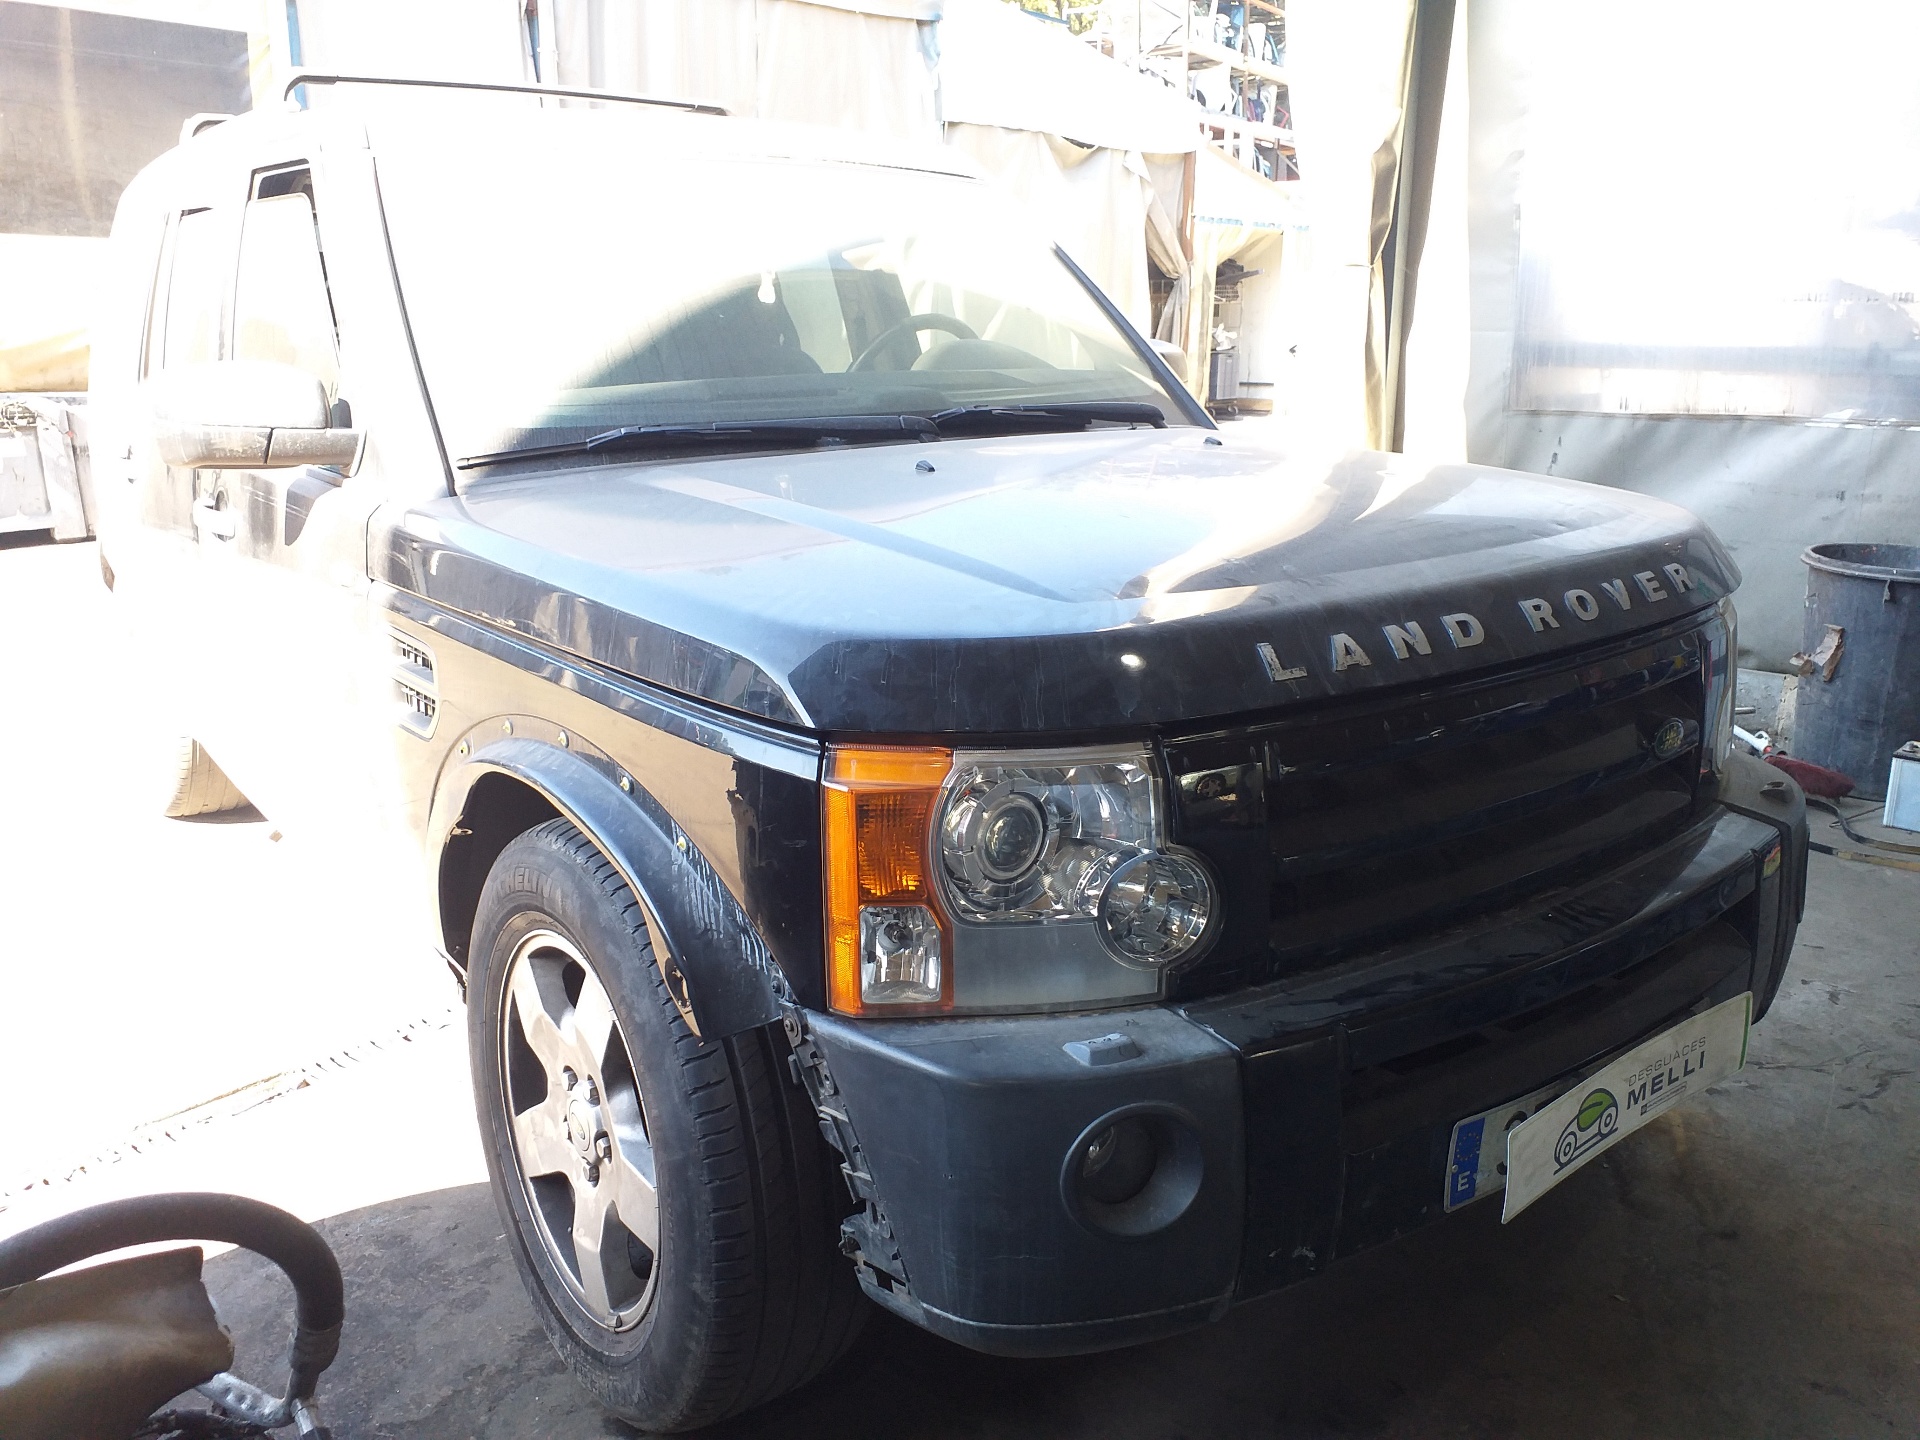 LAND ROVER Discovery 4 generation (2009-2016) ABS blokas SRB500163 18749863